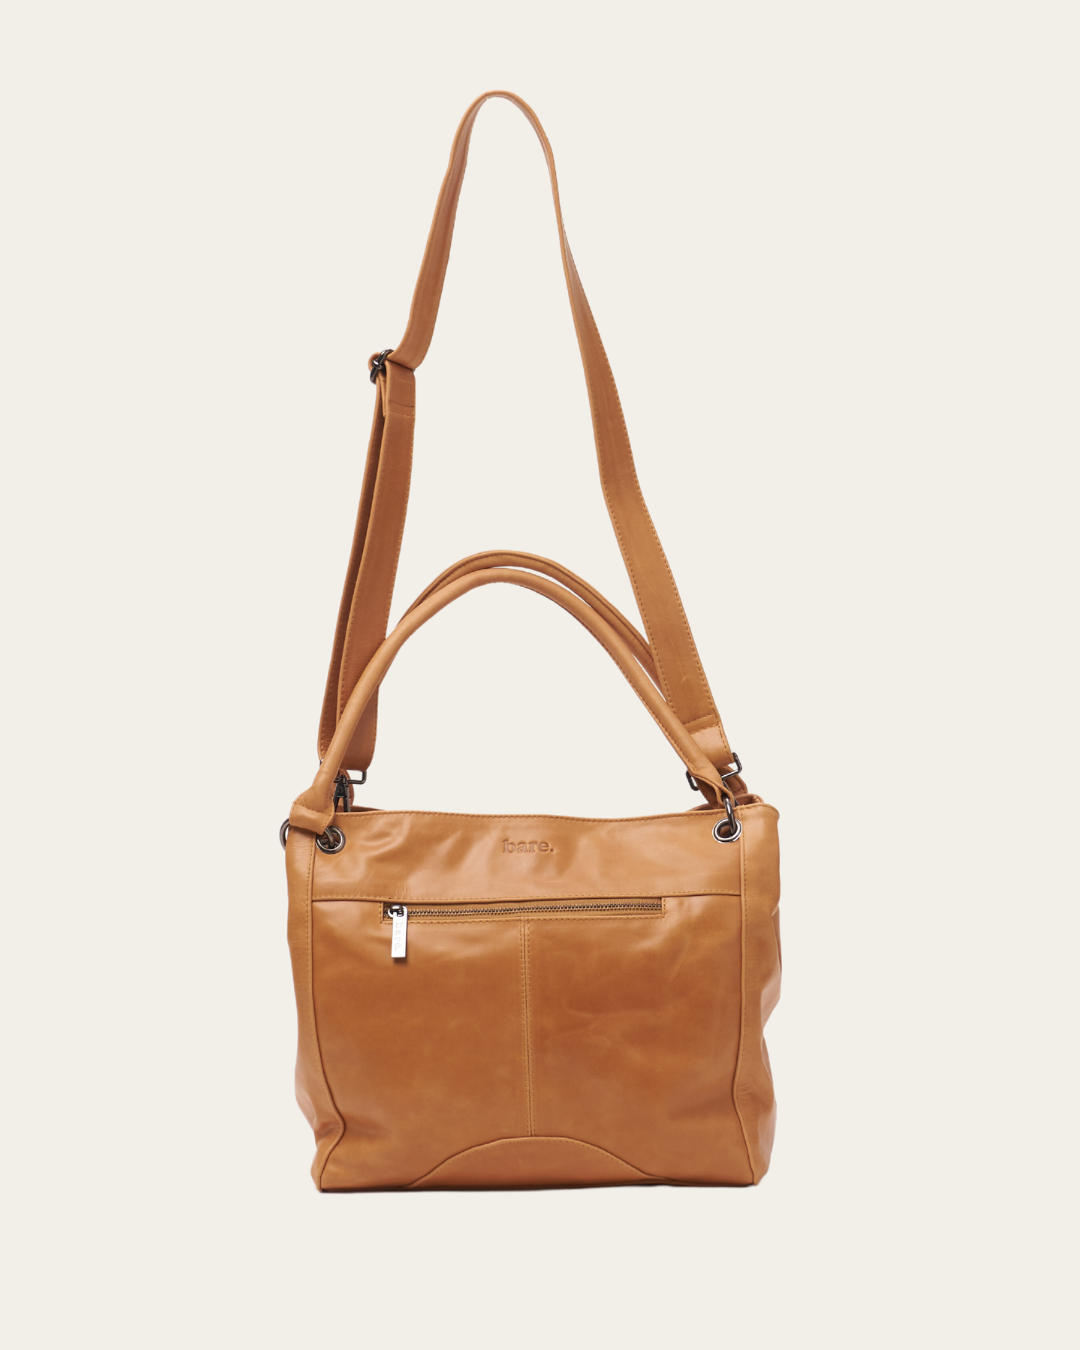 Remy Bag - BARE Leather